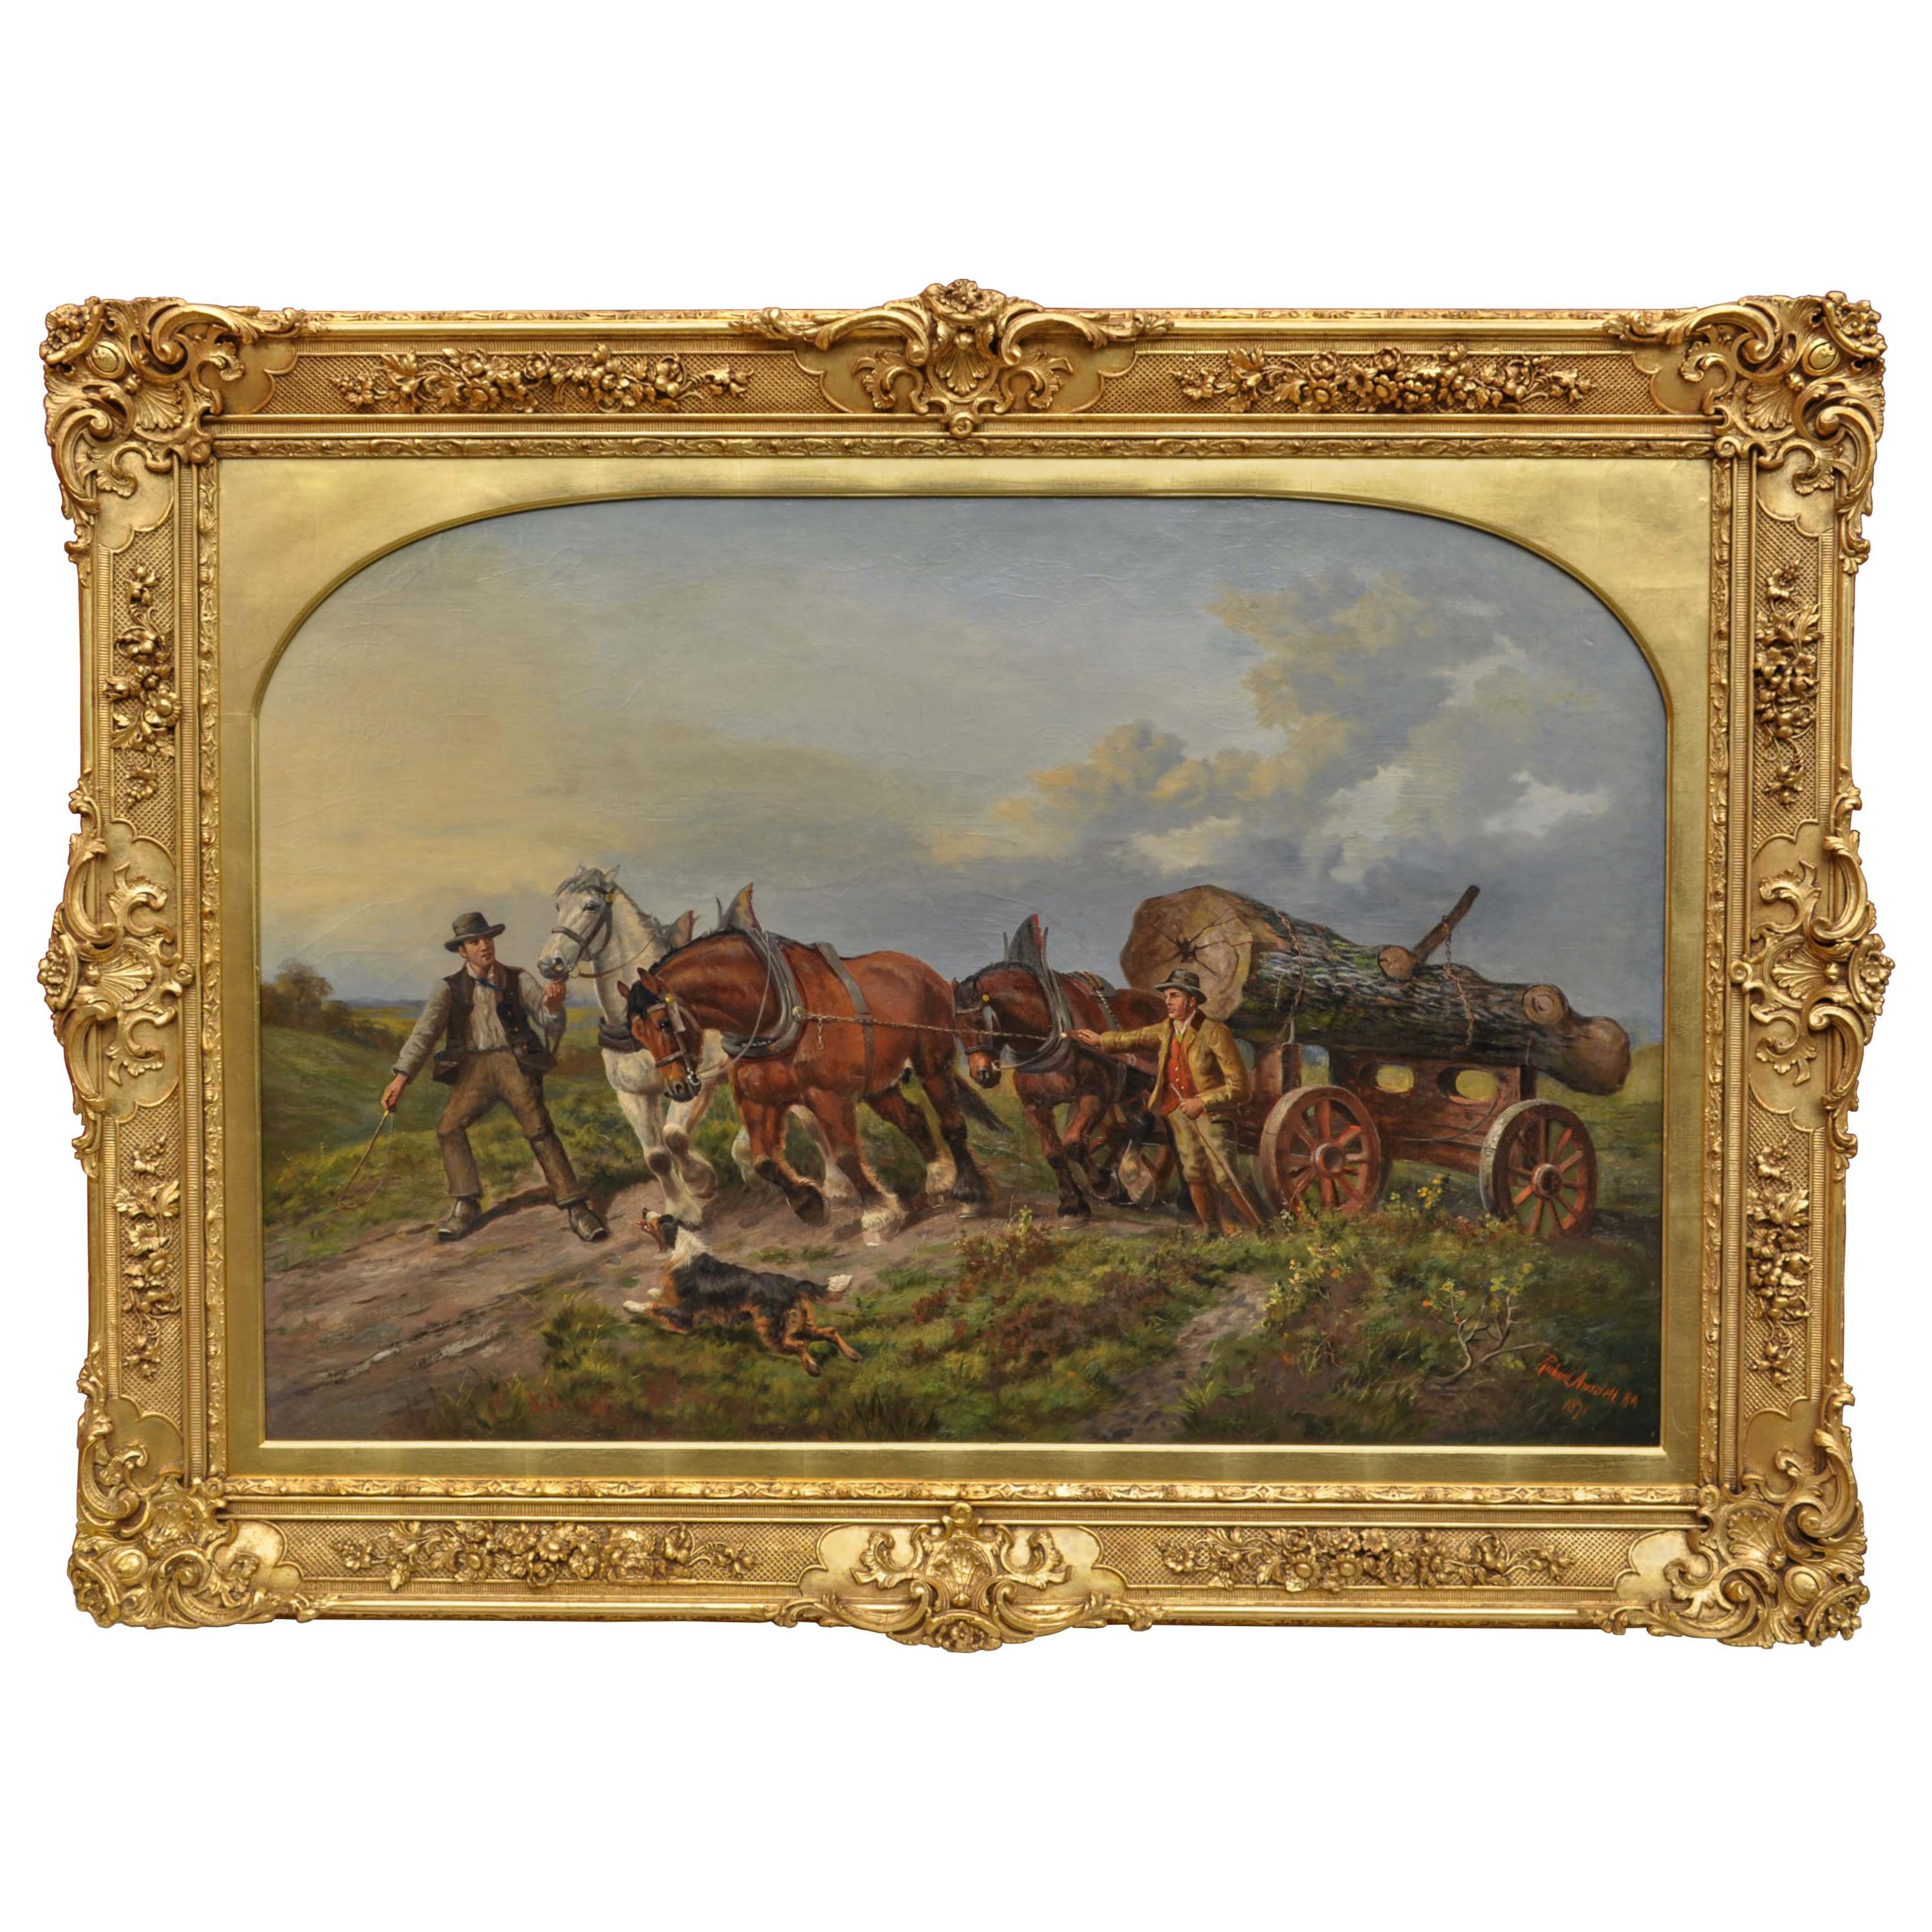 A fine & Monumental antique oil on canvas painting, a Scottish landscape/genre scene, signed and dated  "Richard Ansdell RA 1871".
The painting depicting a Scottish Highland scene of two gentlemen farmers guiding three shire-horses pulling a massive